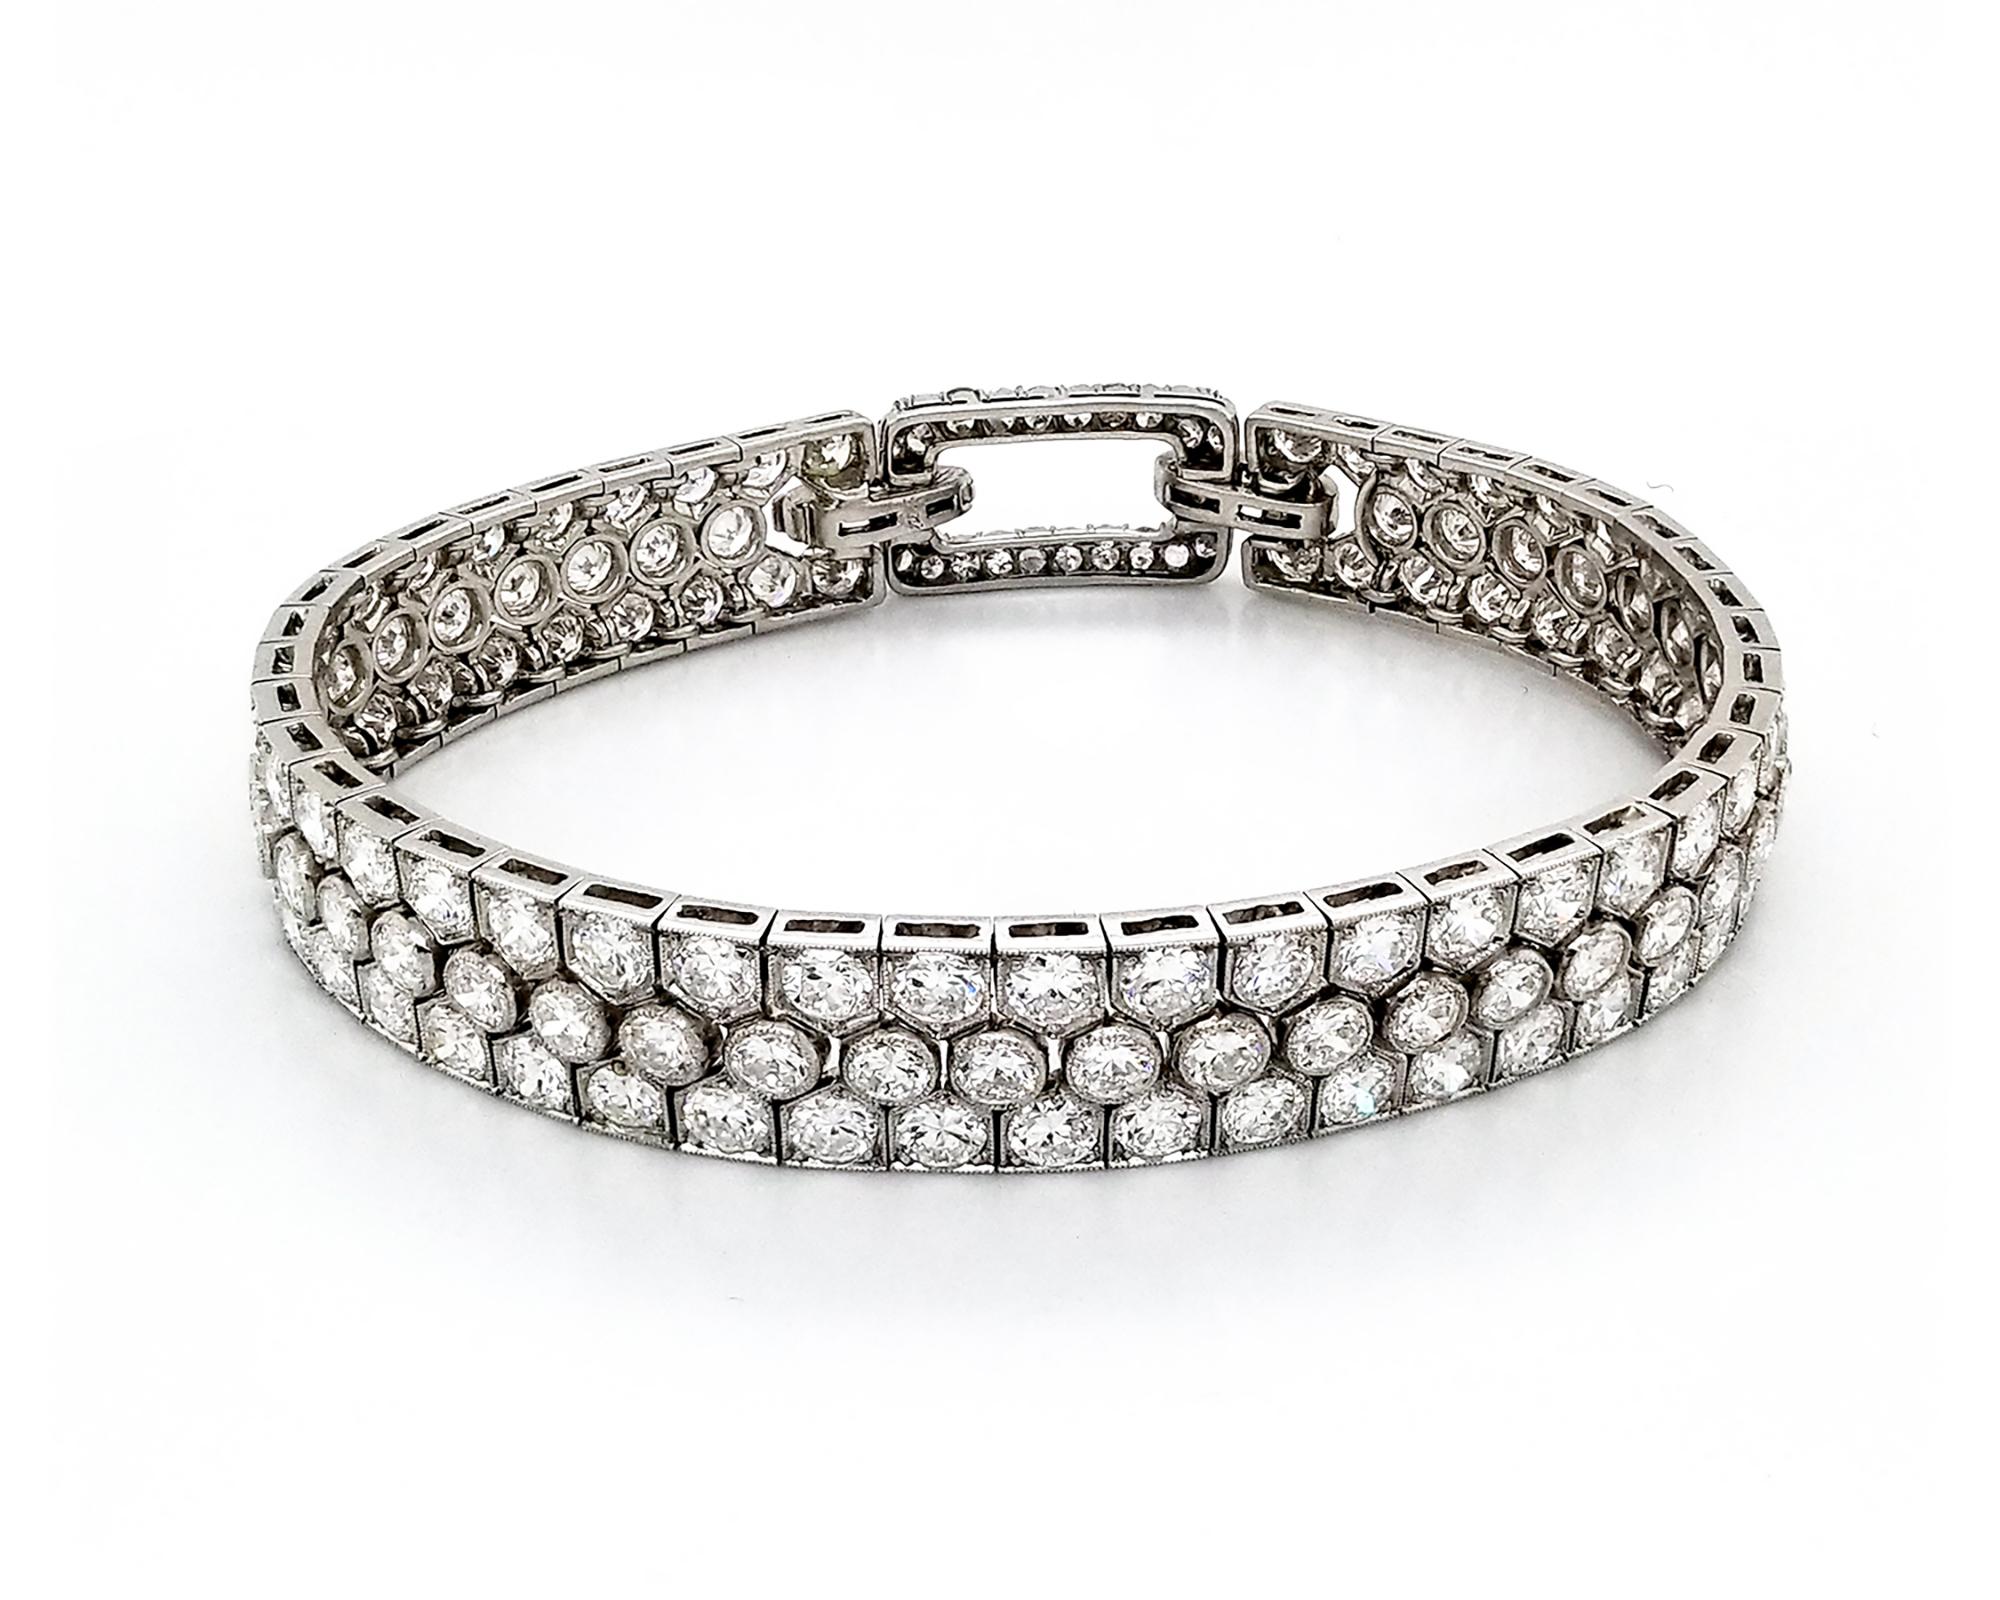 A gorgeous bracelet from the Art Deco period embellished with diamonds and made in platinum.
Total weight of the diamonds is 15.00 carats. 
Platinum weighs 30.49 grams.
The bracelet is 7.25in long.